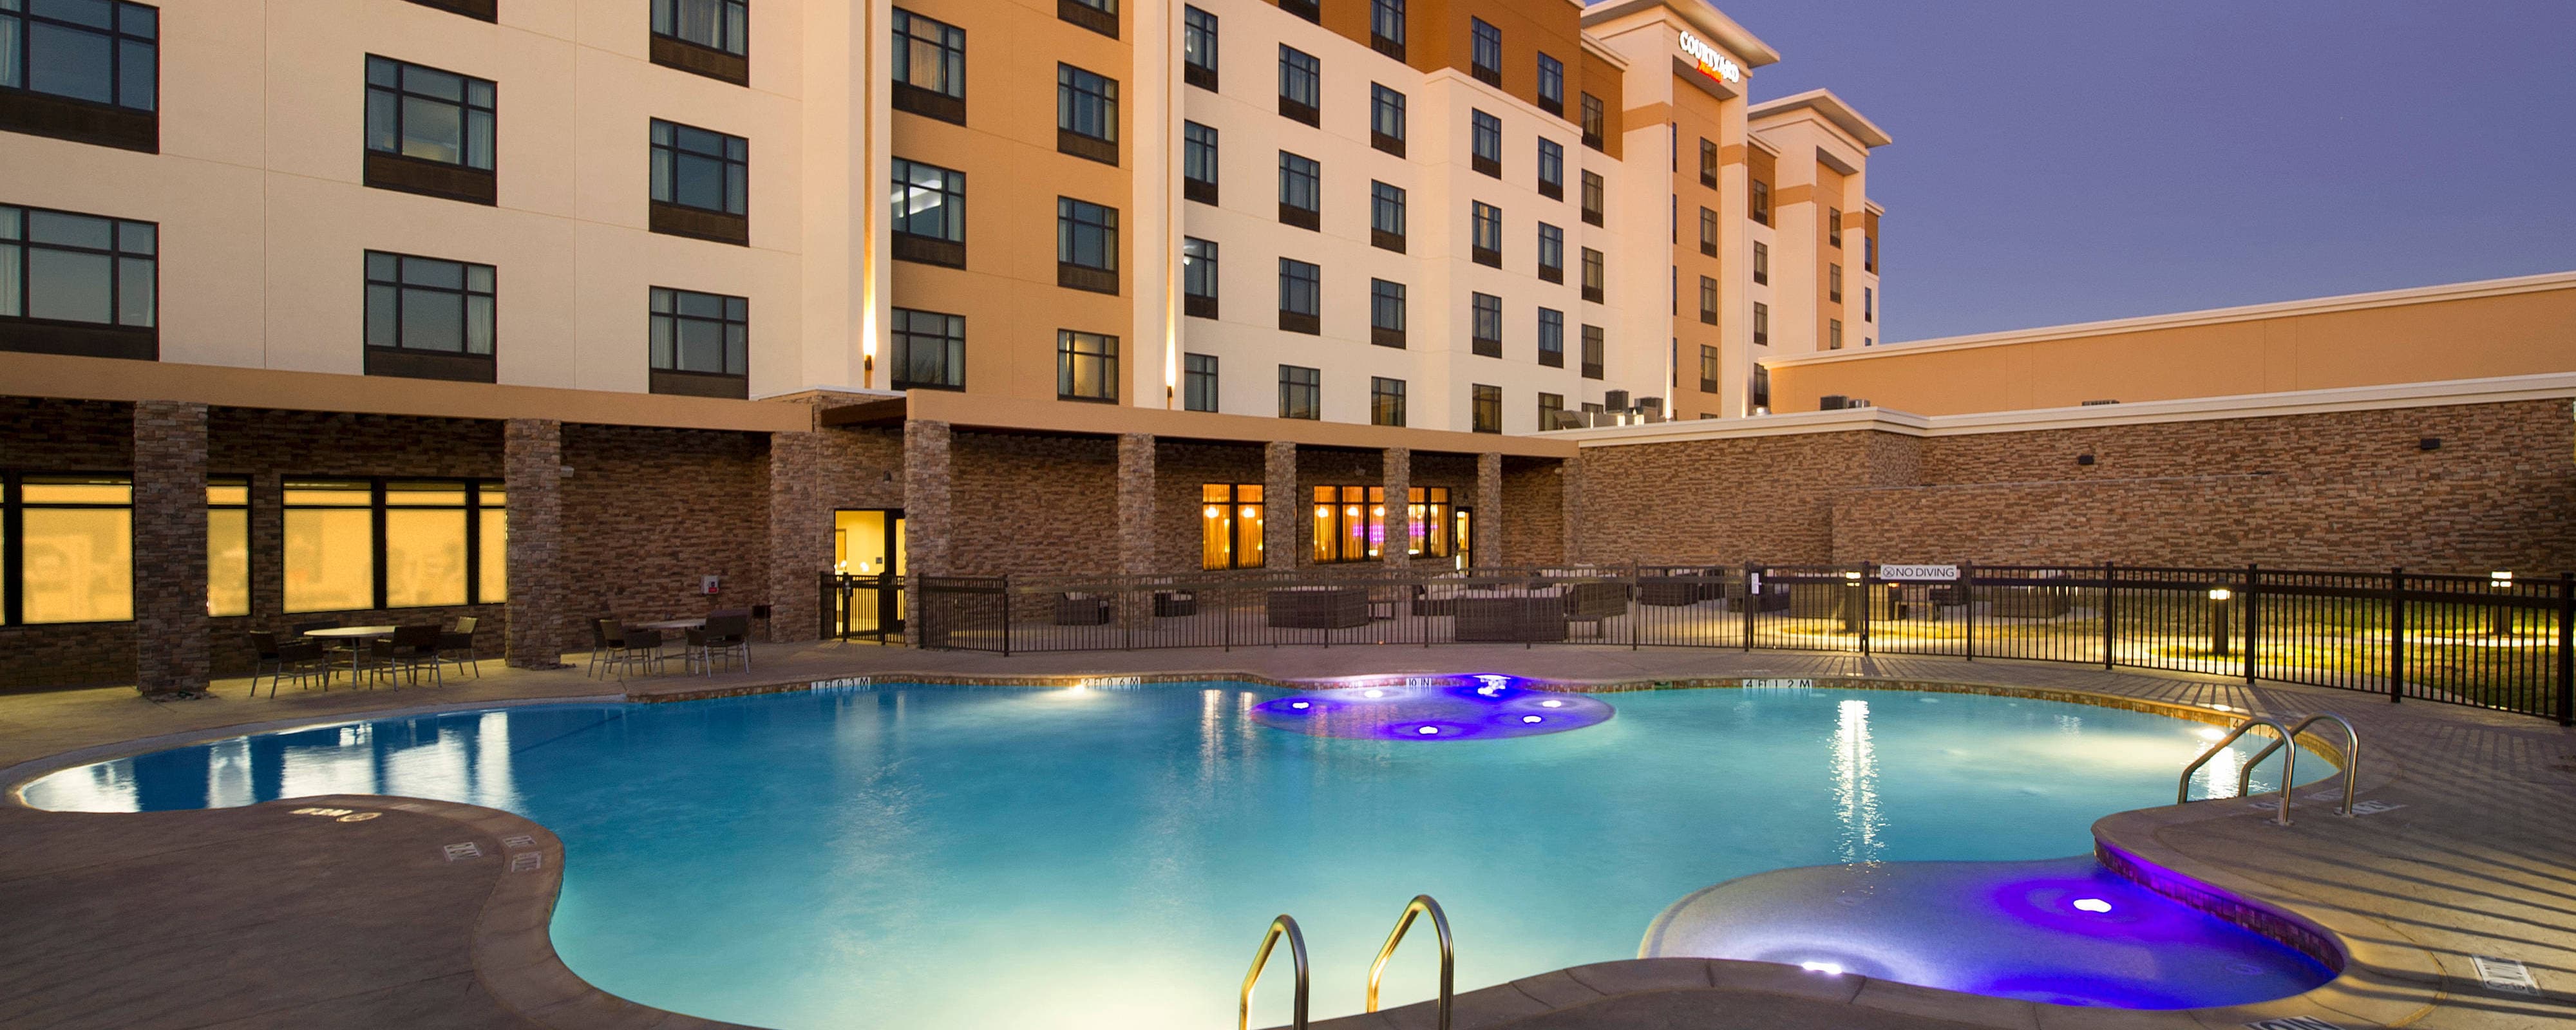 Hotels near DFW Airport with Pool TownePlace Suites Dallas DFW